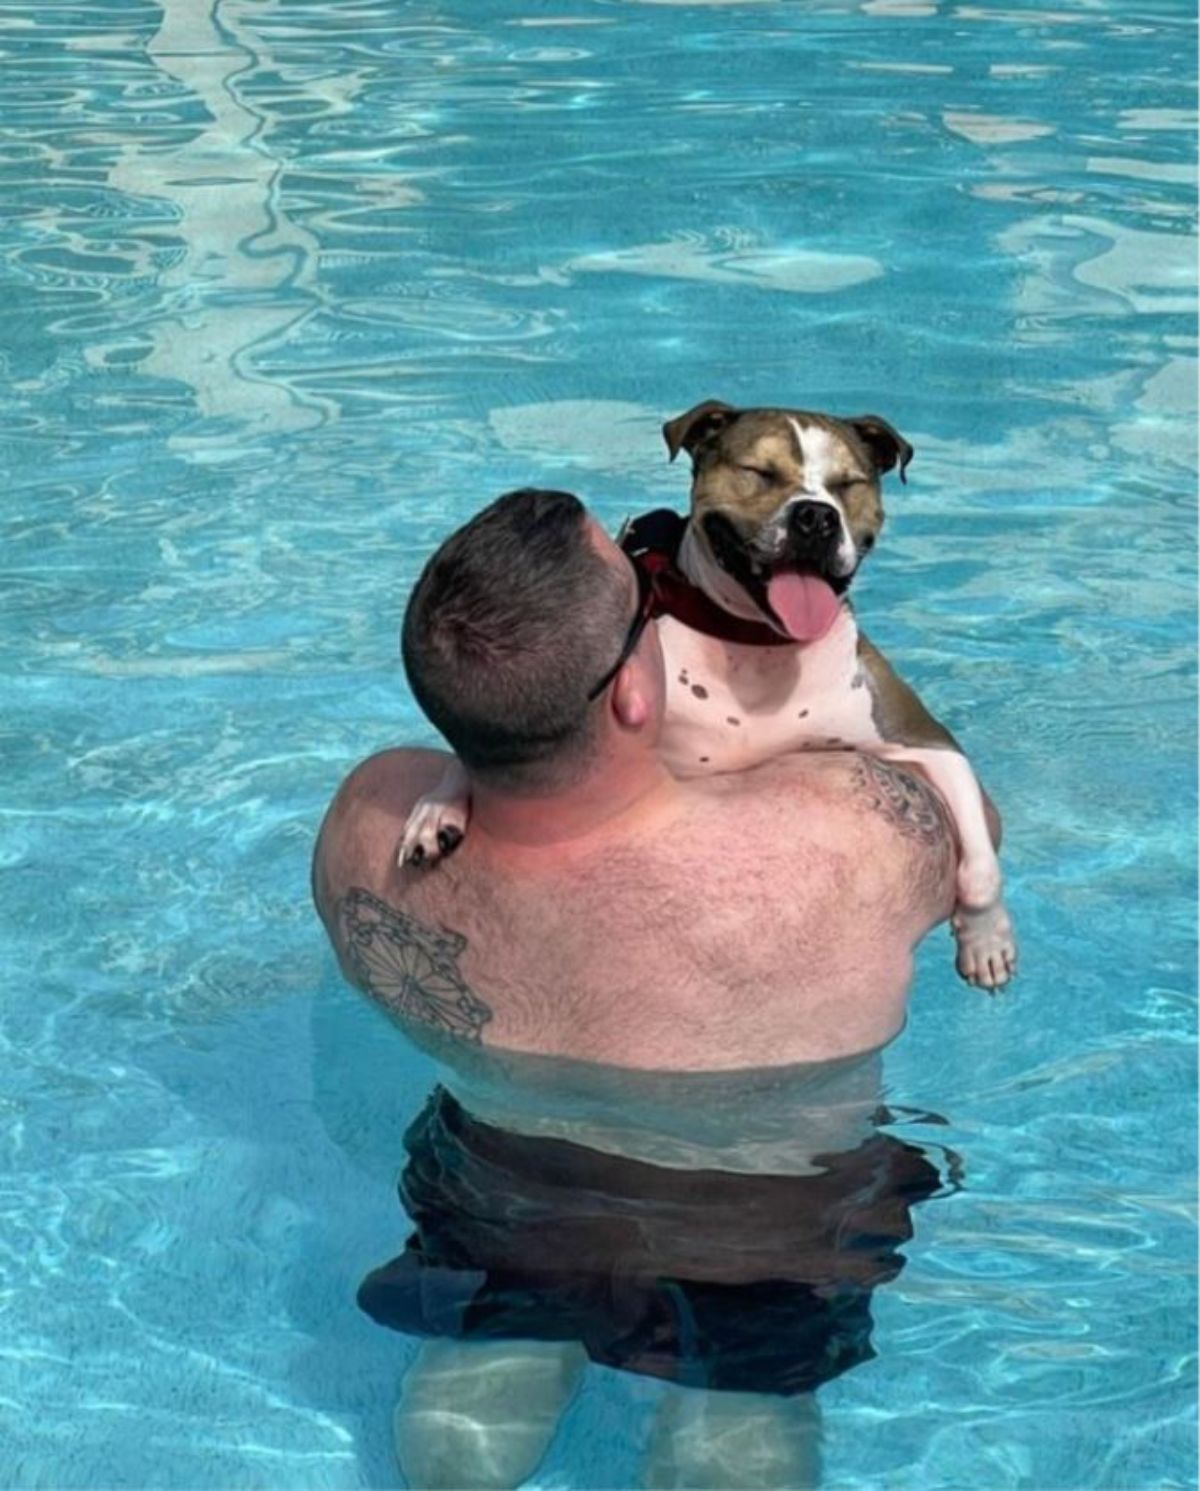 brown and white pitbull being held by a shirtless man and they are in a swimming pool